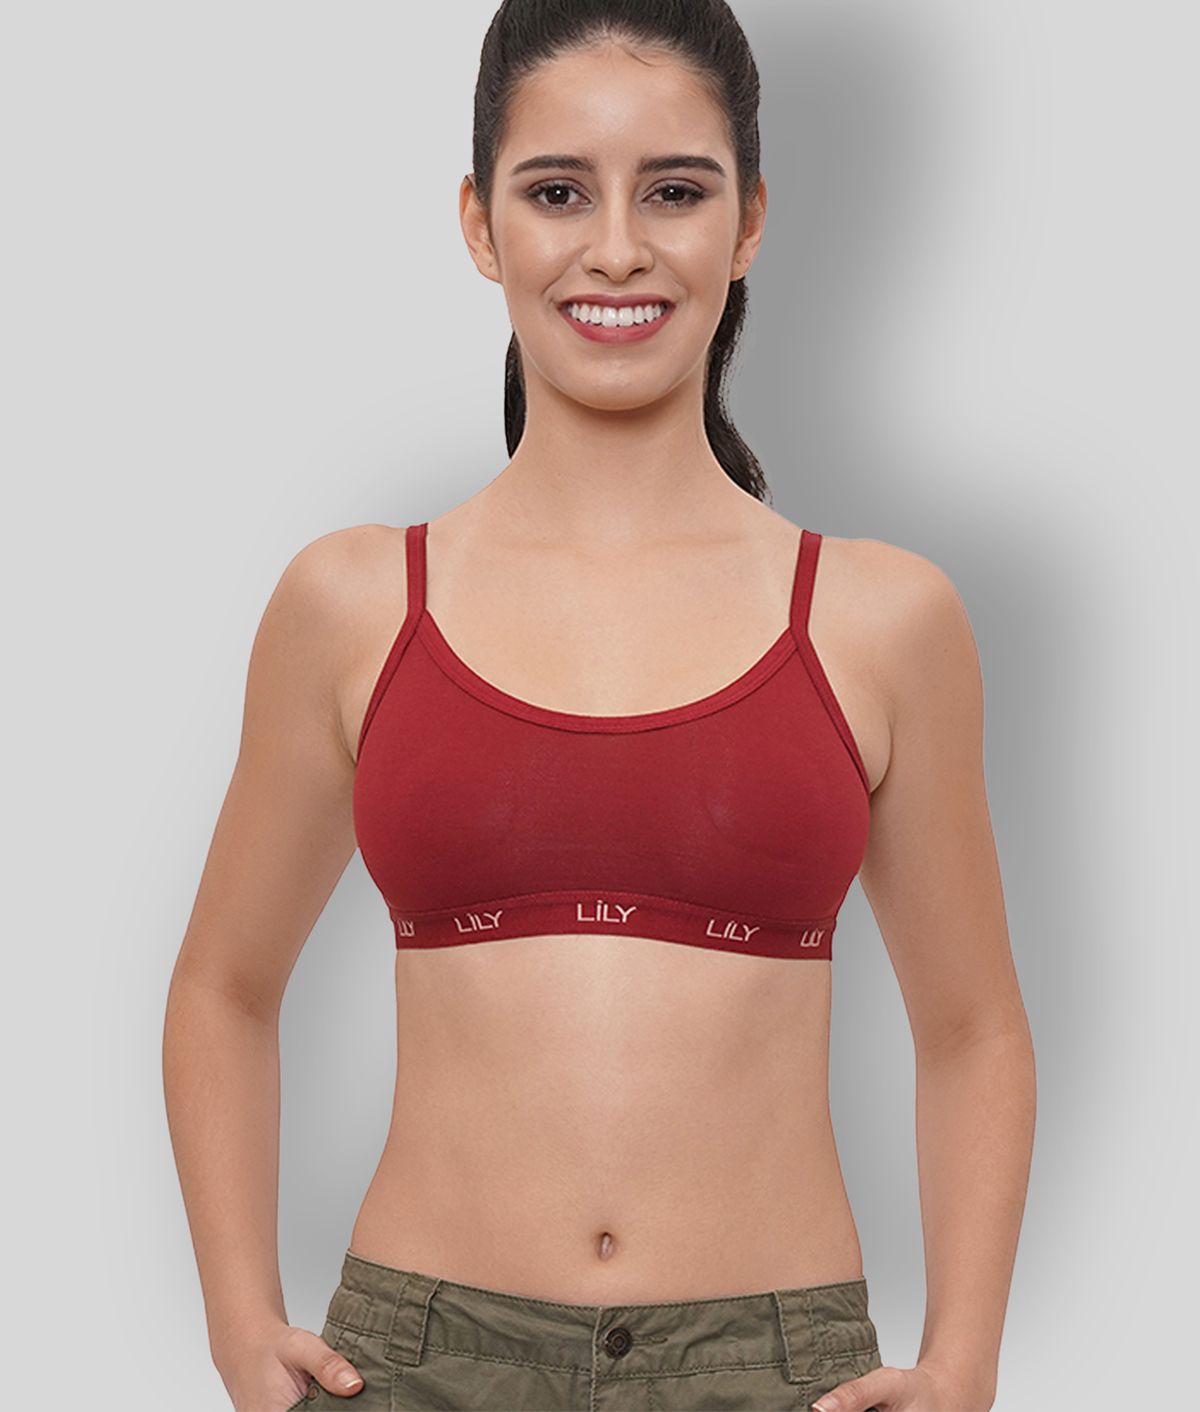 Lily - Maroon Cotton Blend Non Padded Women's Sports Bra ( Pack of 1 )